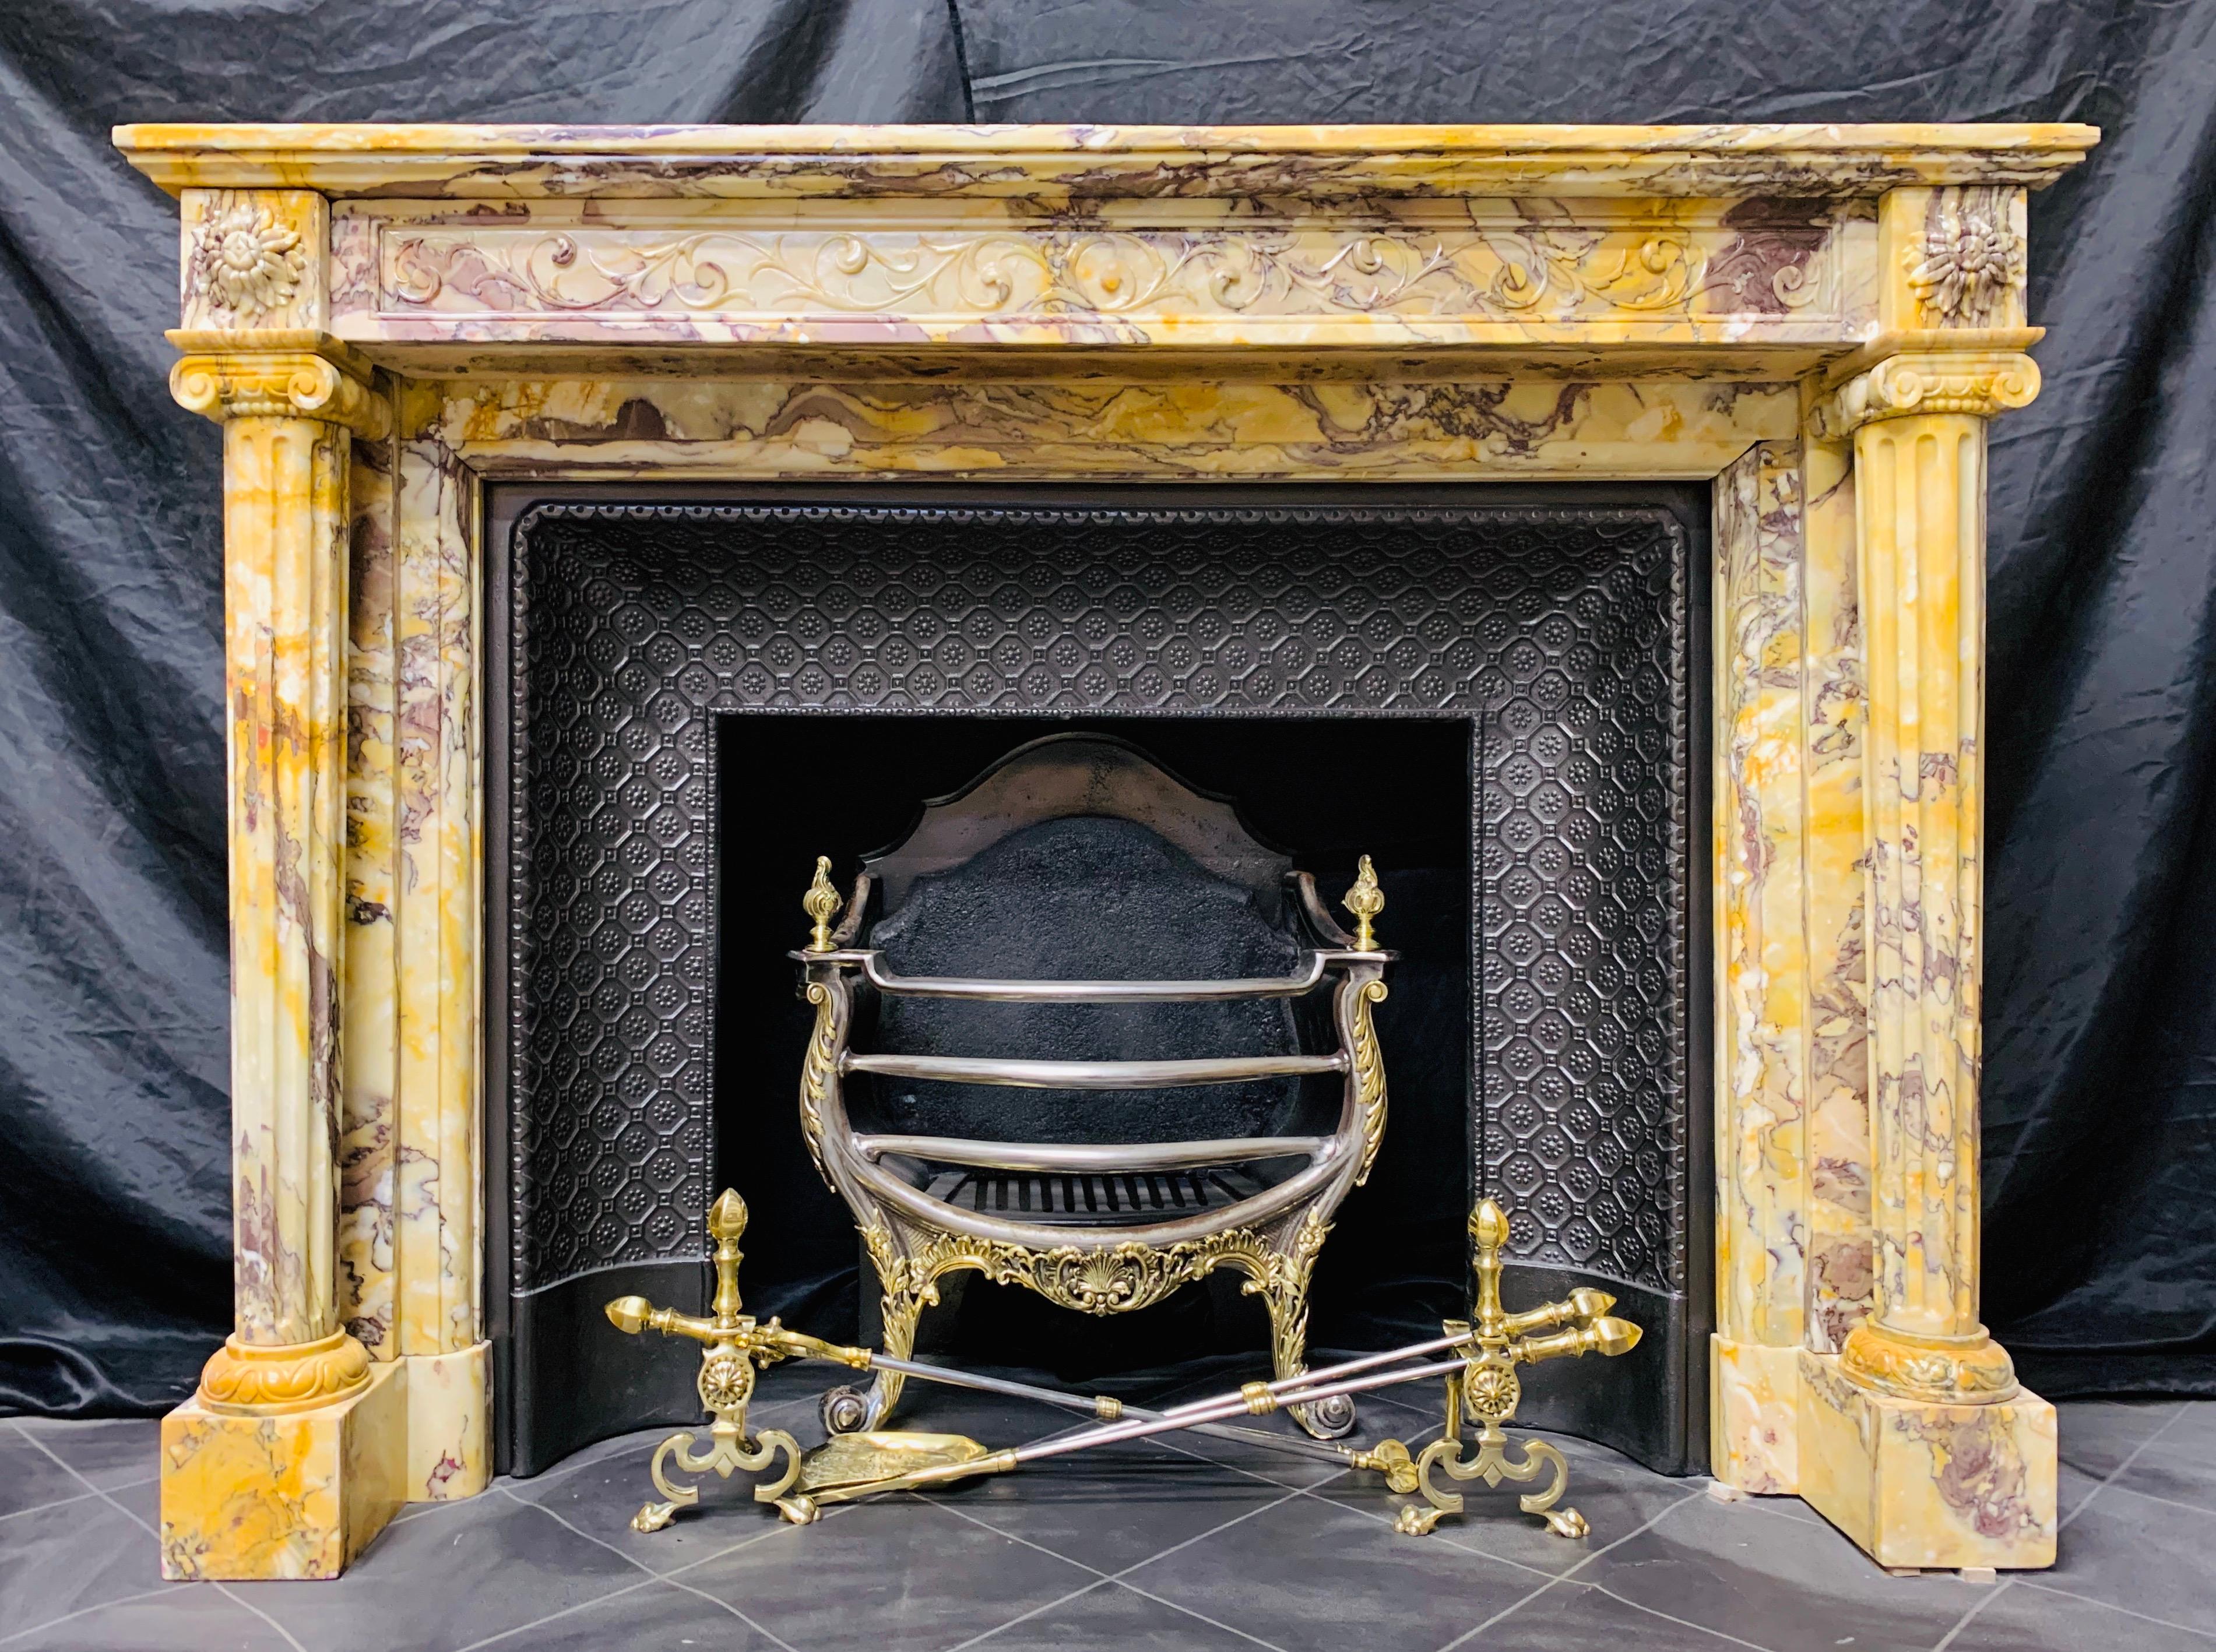 A very fine mid-19th Century French neoclassical fireplace surround in golden vibrant Convent Giallo di Siena marble. A deep rectangular shelf with an edged moulding gracefully rests on an elegant framed high relief carved frieze showing full length